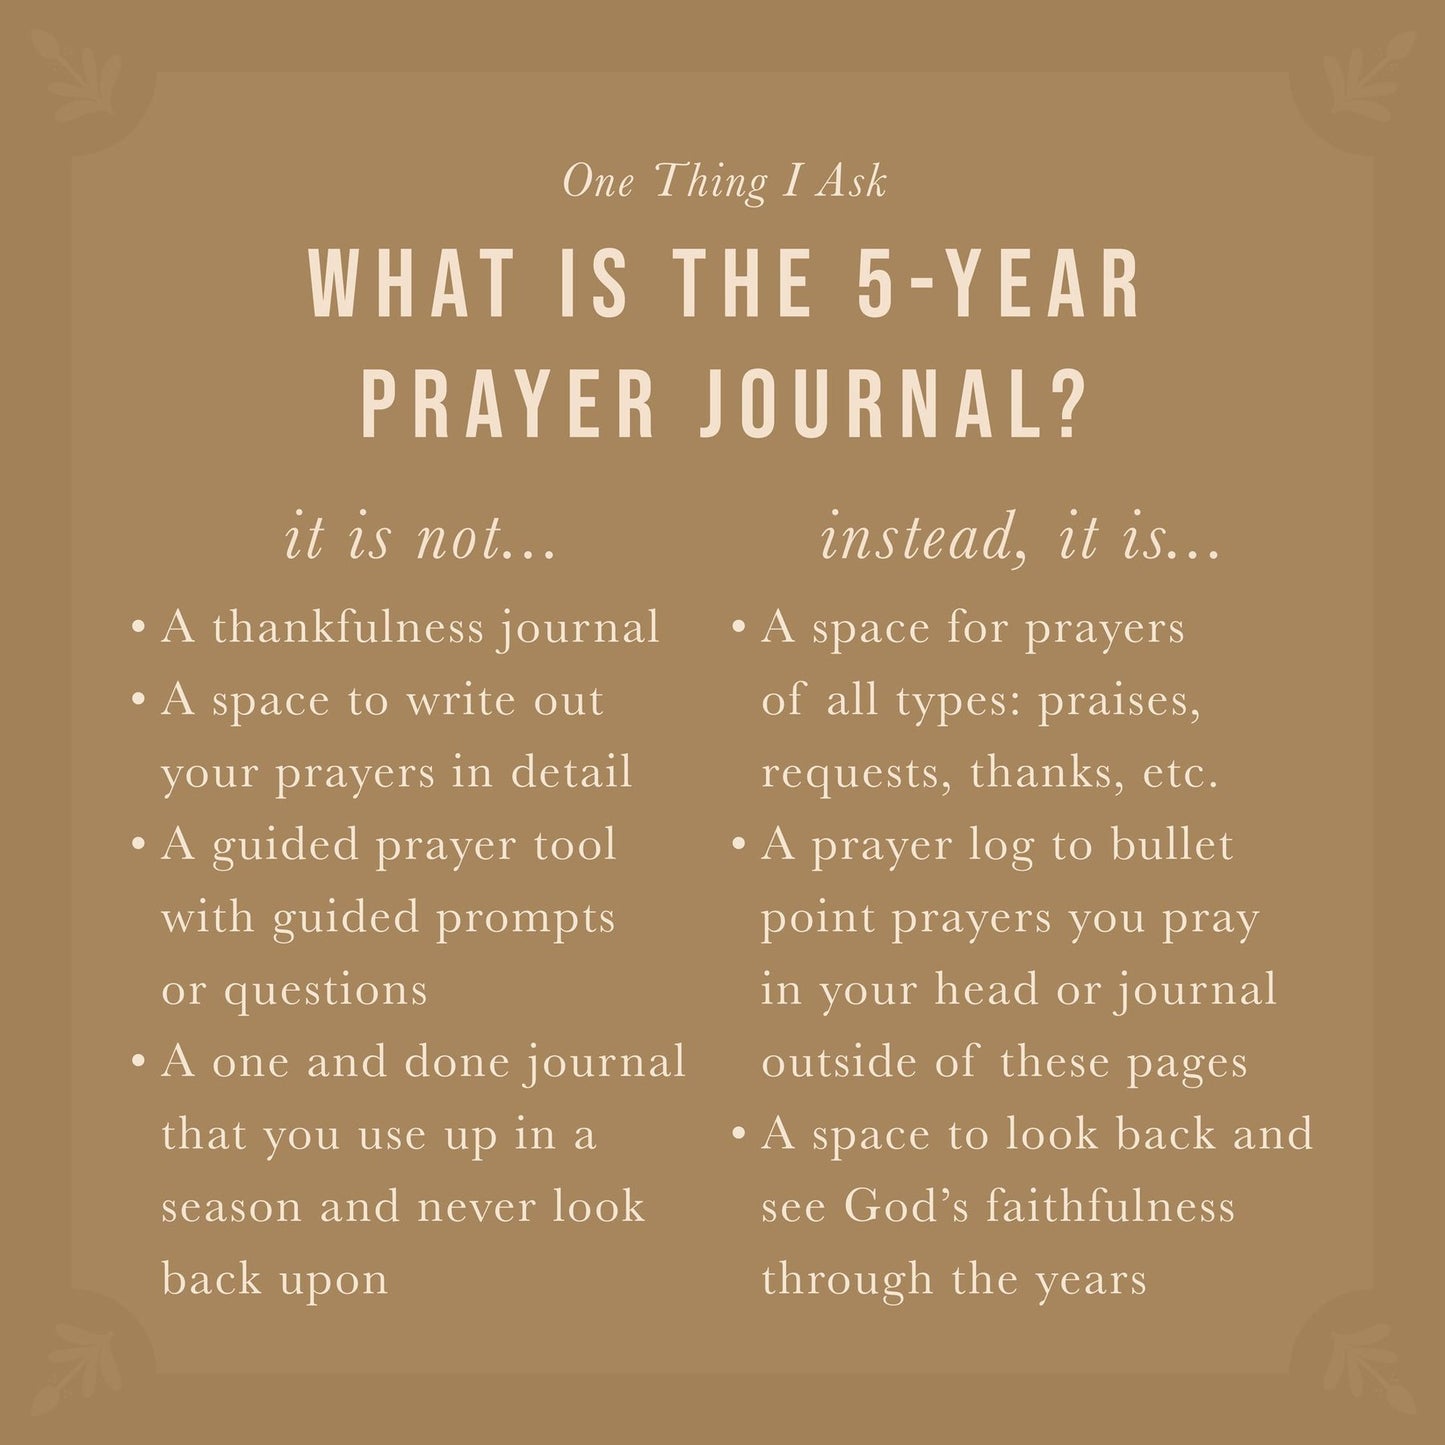 One Thing I Ask 5-Year Prayer Journal: Stockholm